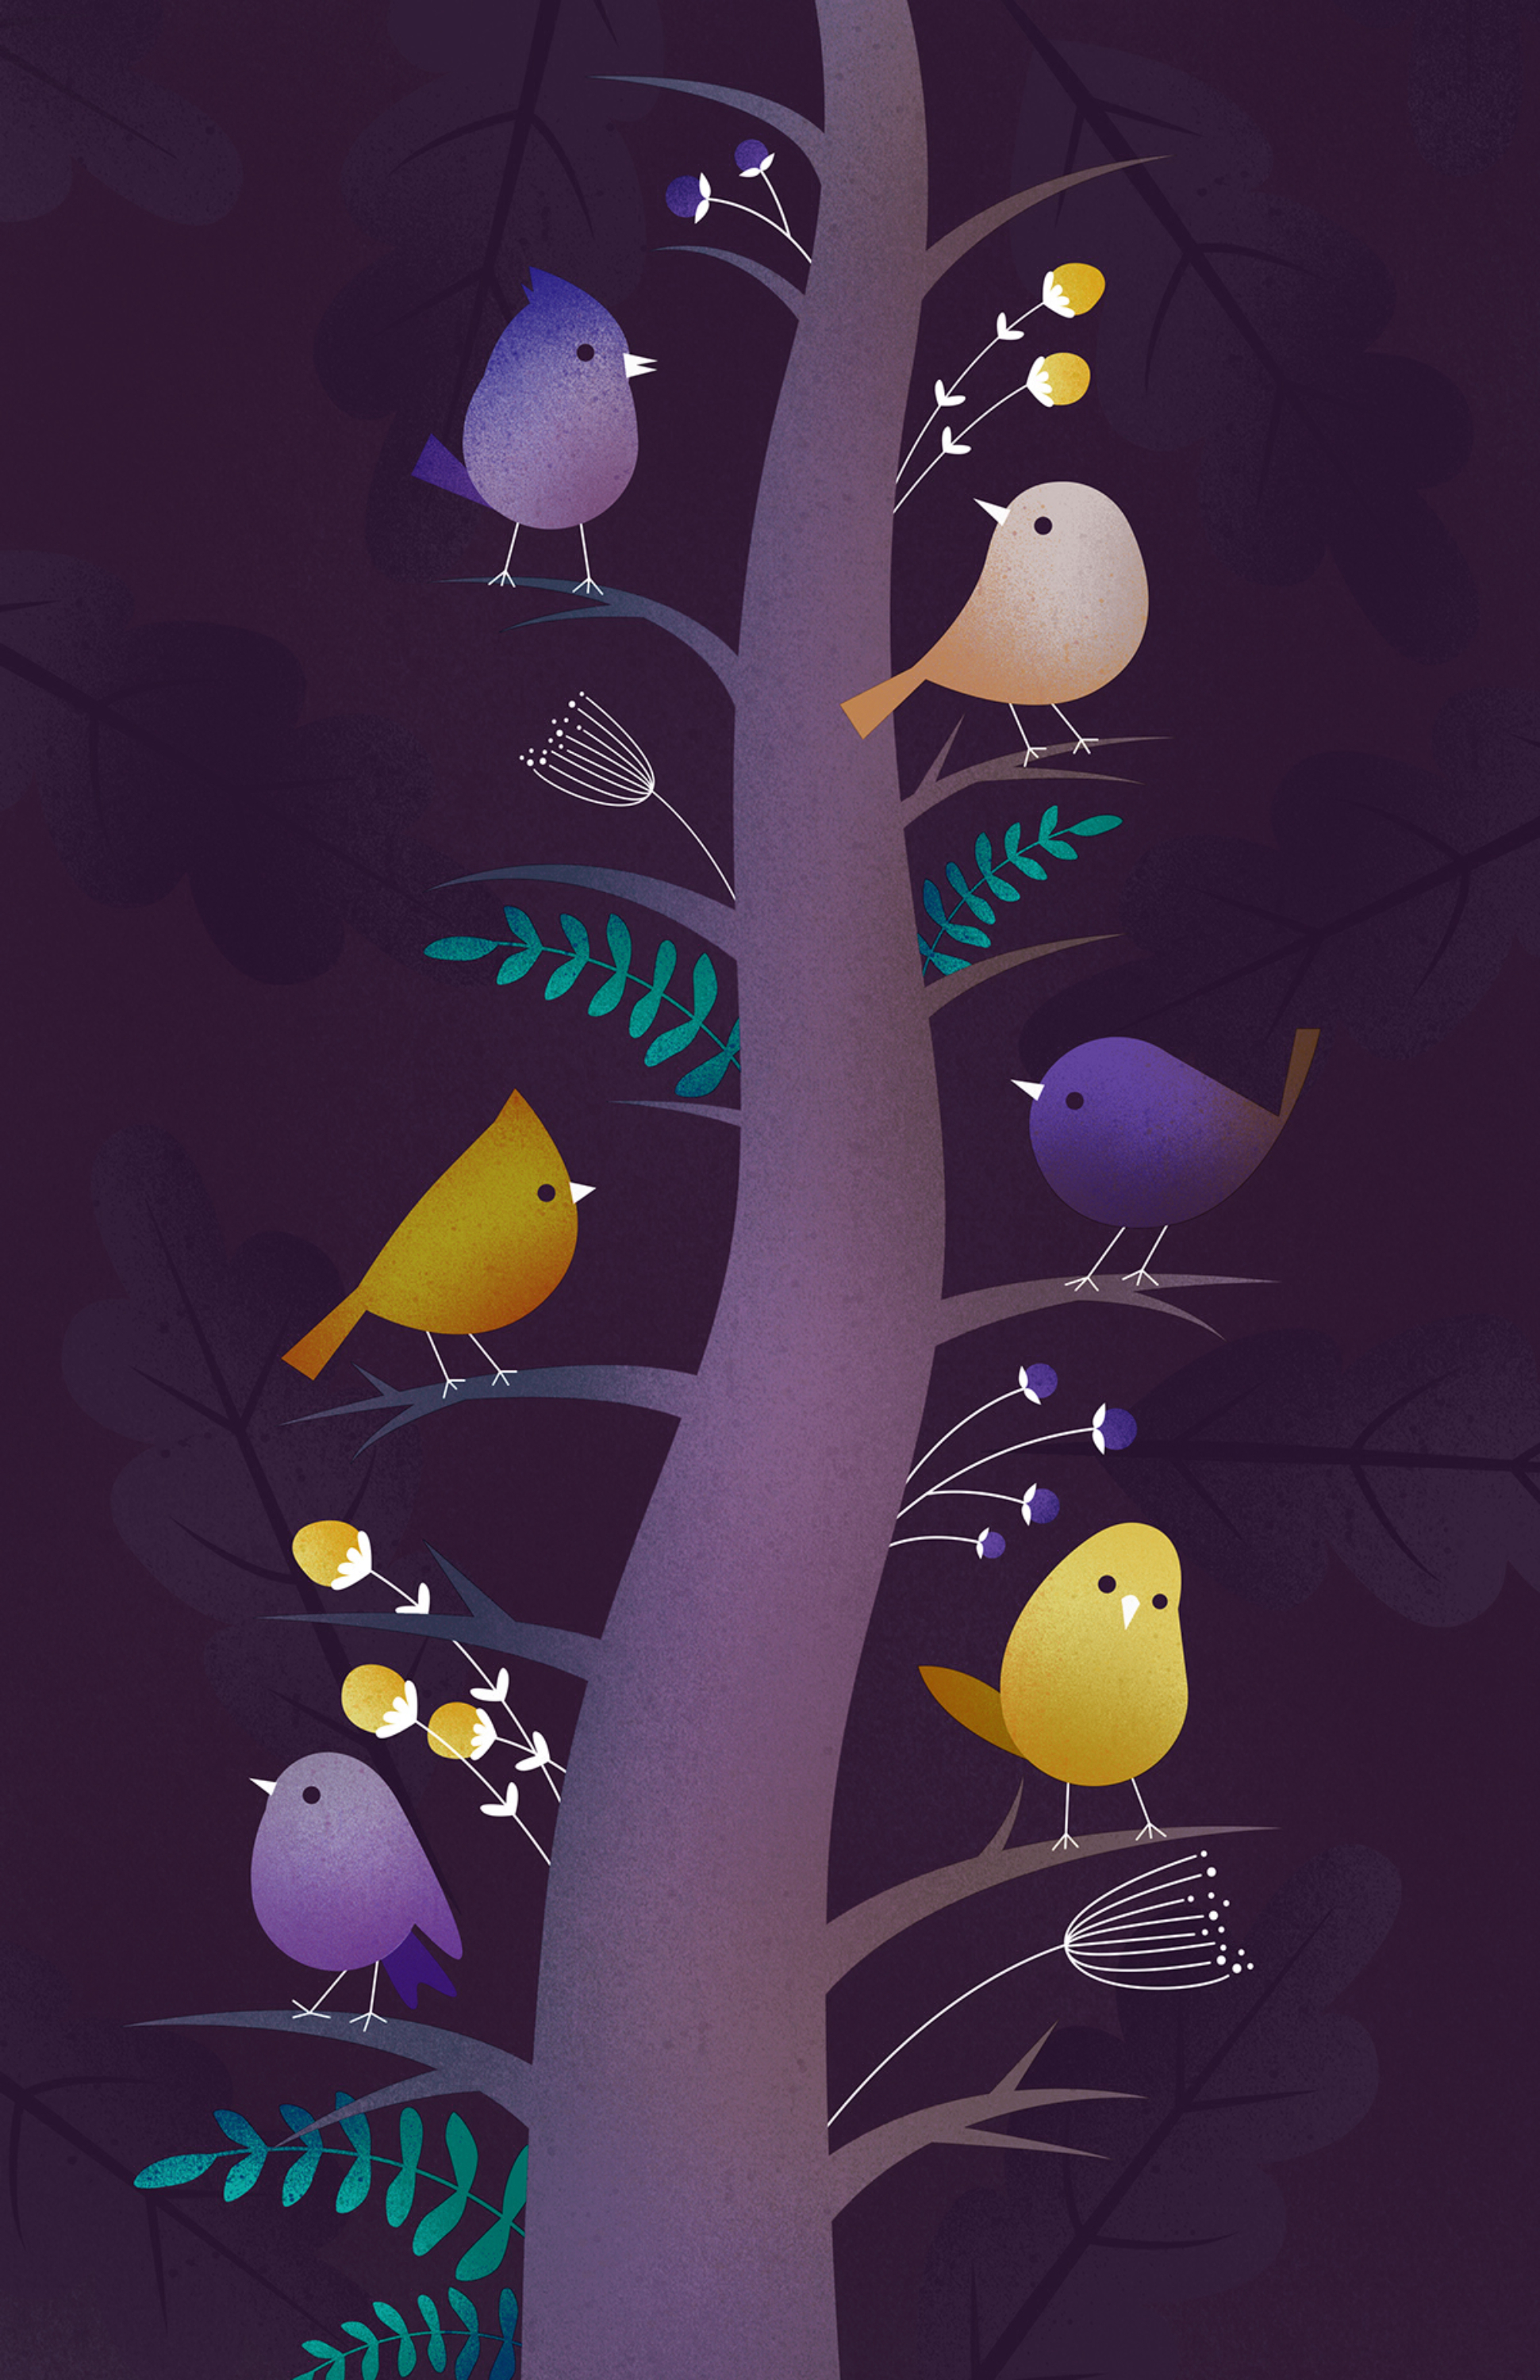 85935 download wallpaper art, birds, vector, wood, tree, branches screensavers and pictures for free